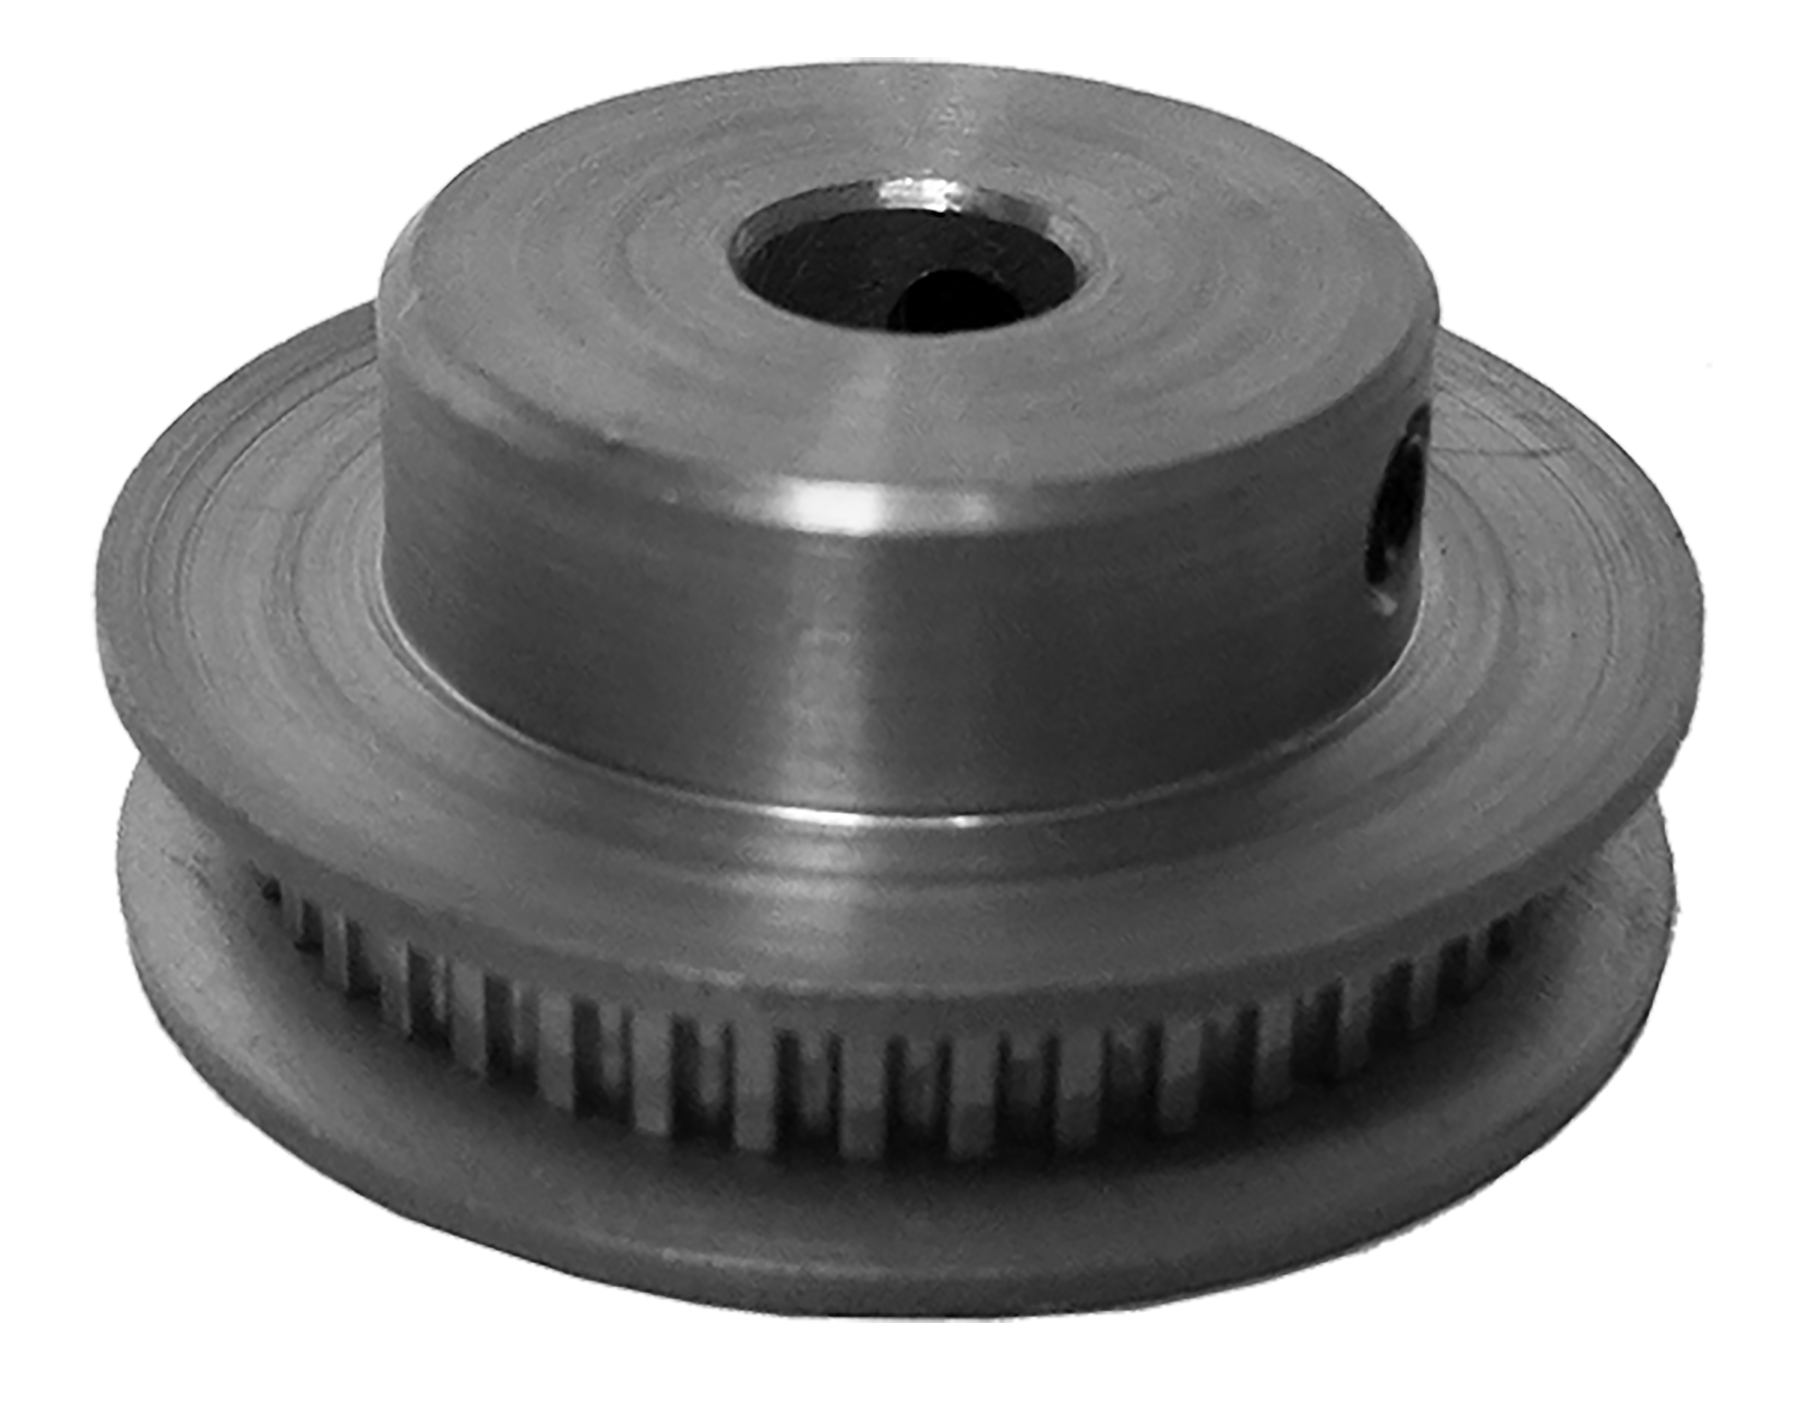 42MP012-6FA3 - Aluminum Imperial Pitch Pulleys